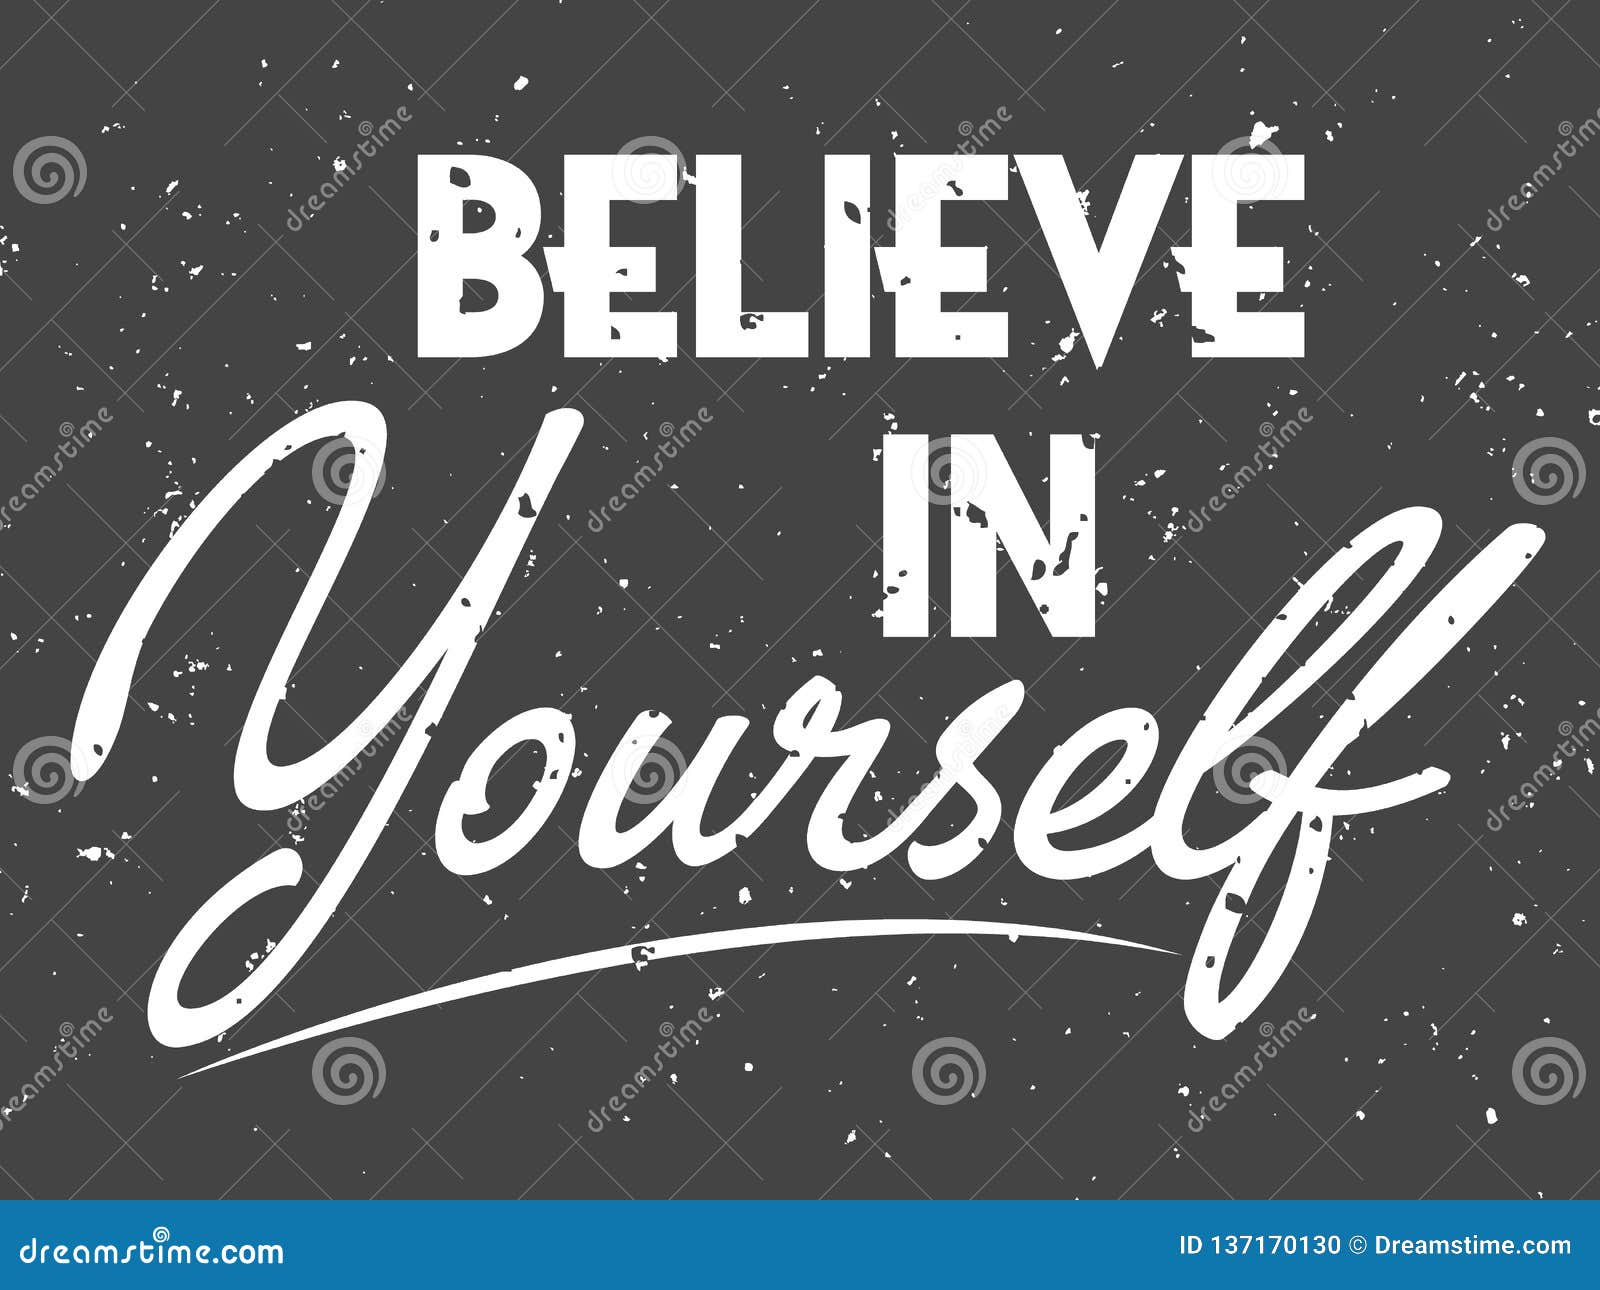 Believe in Yourself Black and White Hand Lettering Font Inscription ...